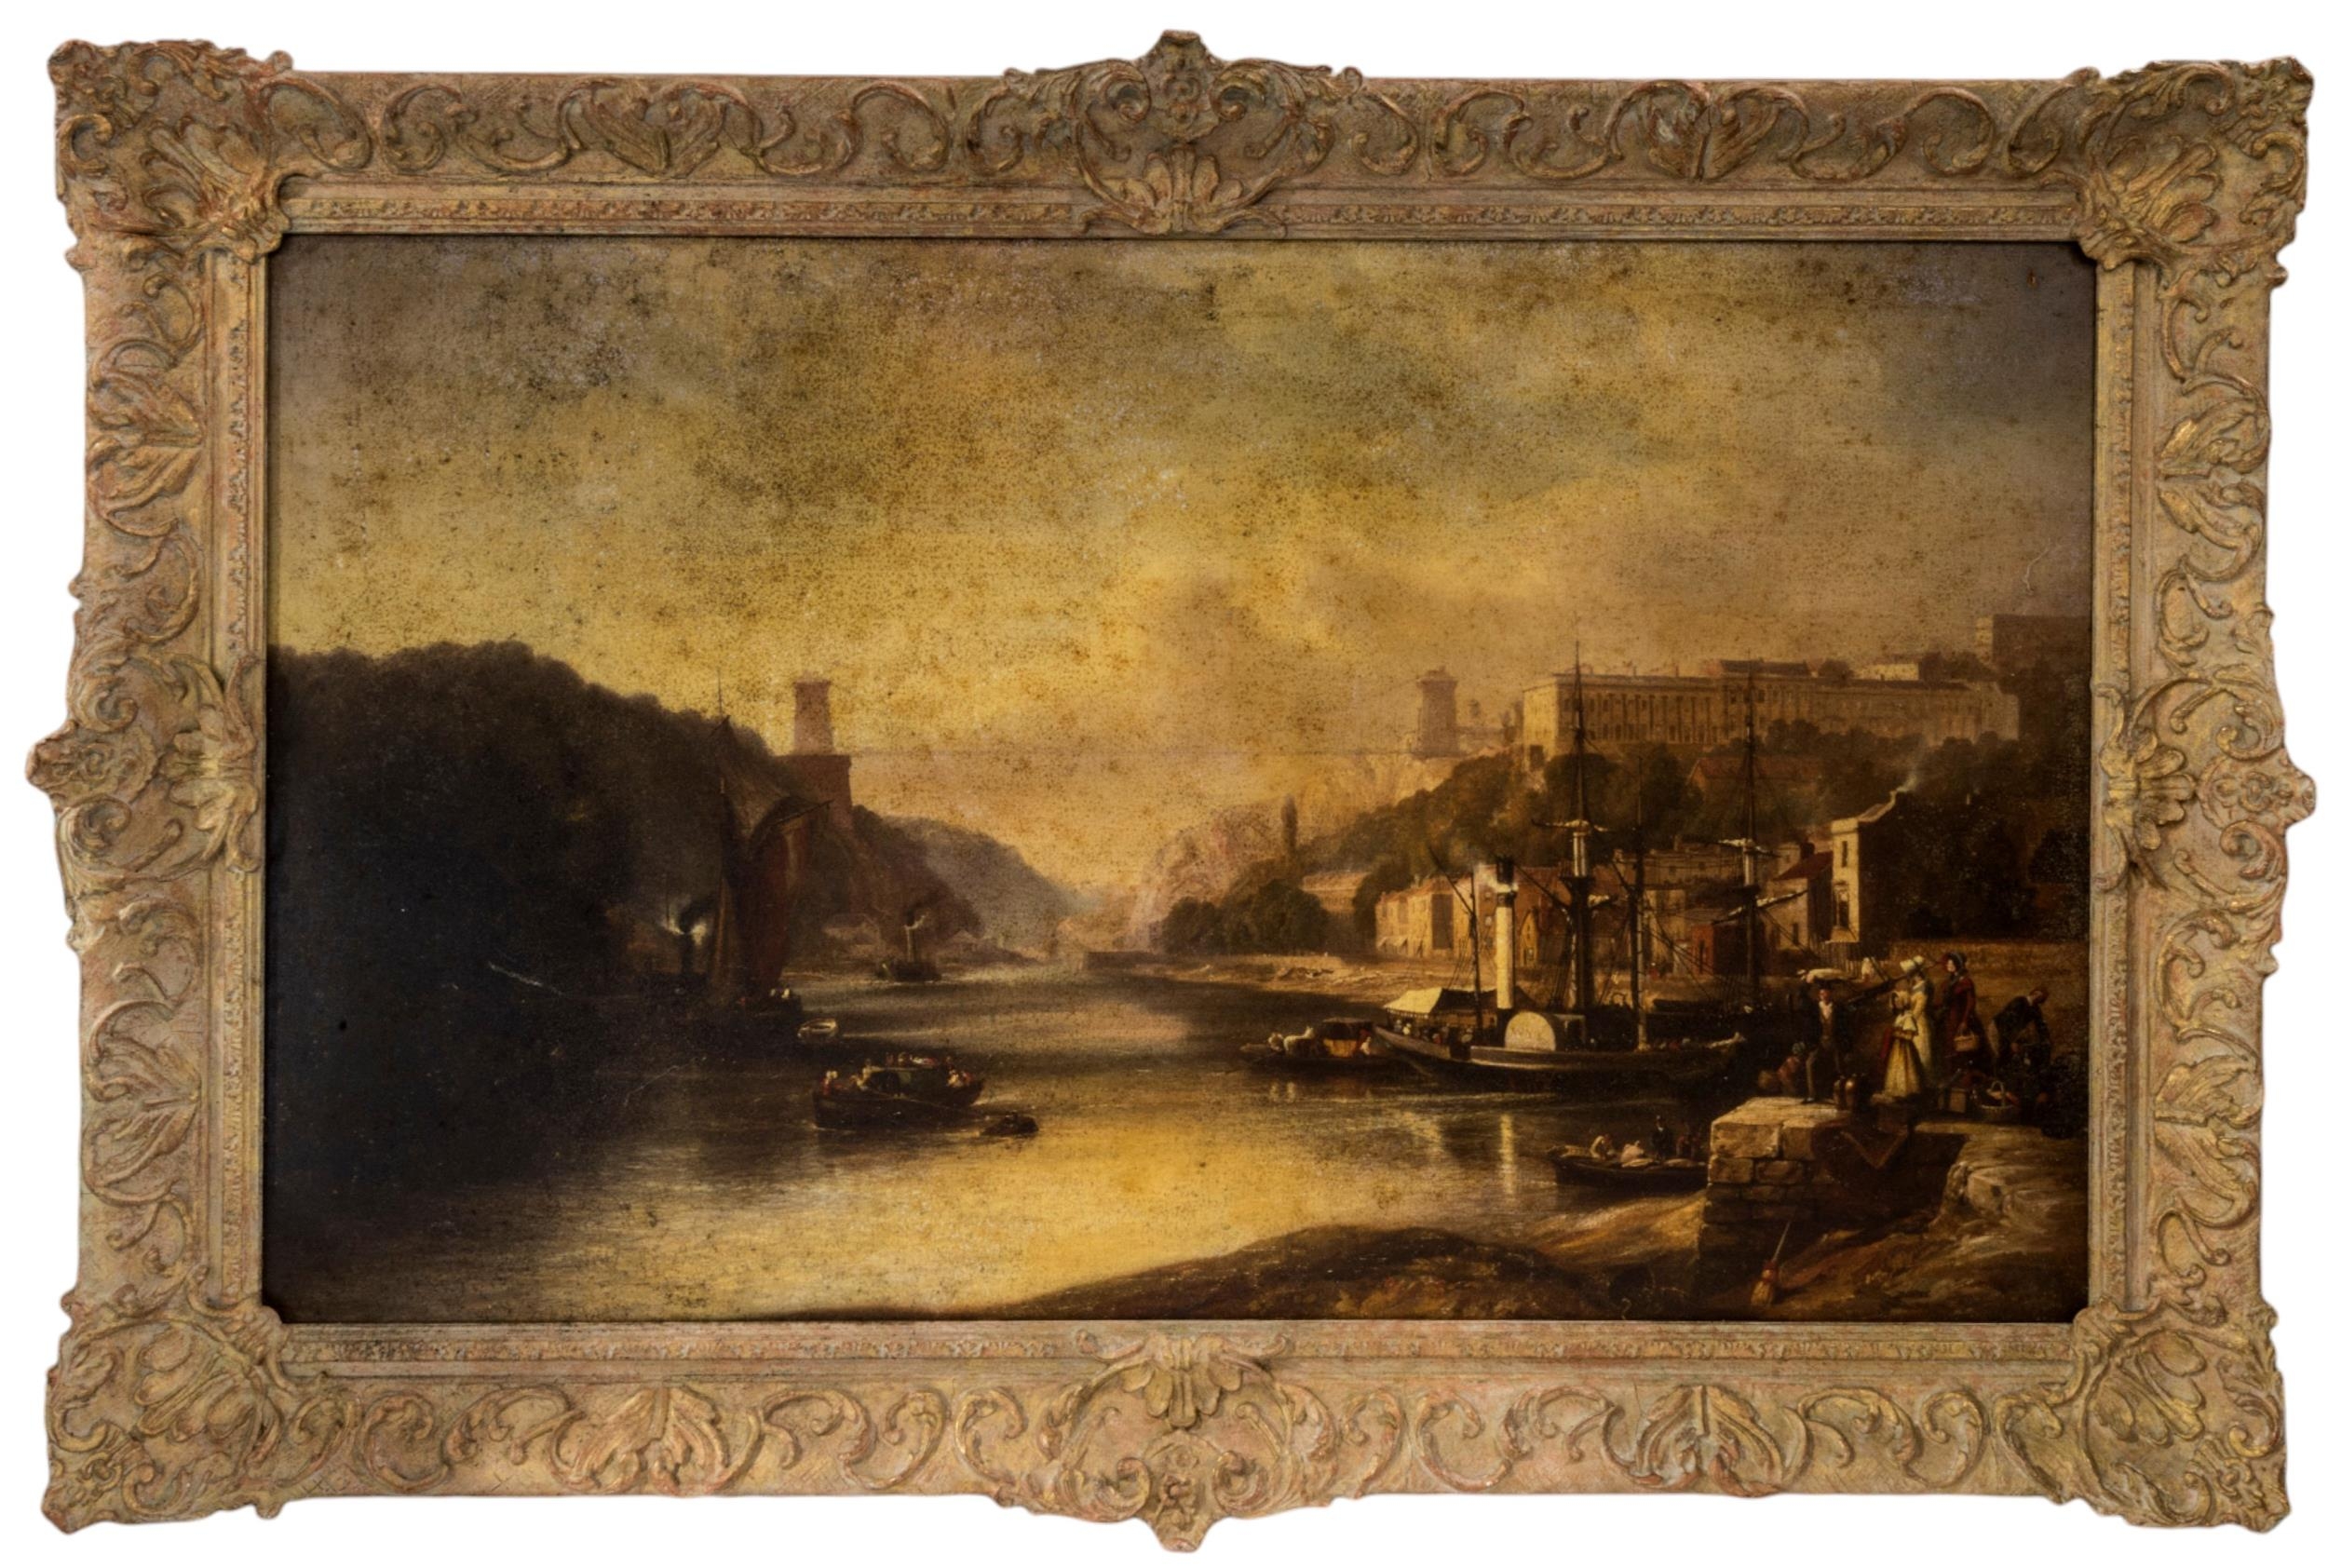 A LARGE OLEOGRAPH ON CANVAS OF THE AVON GORGE, with figures on a quayside waiting to